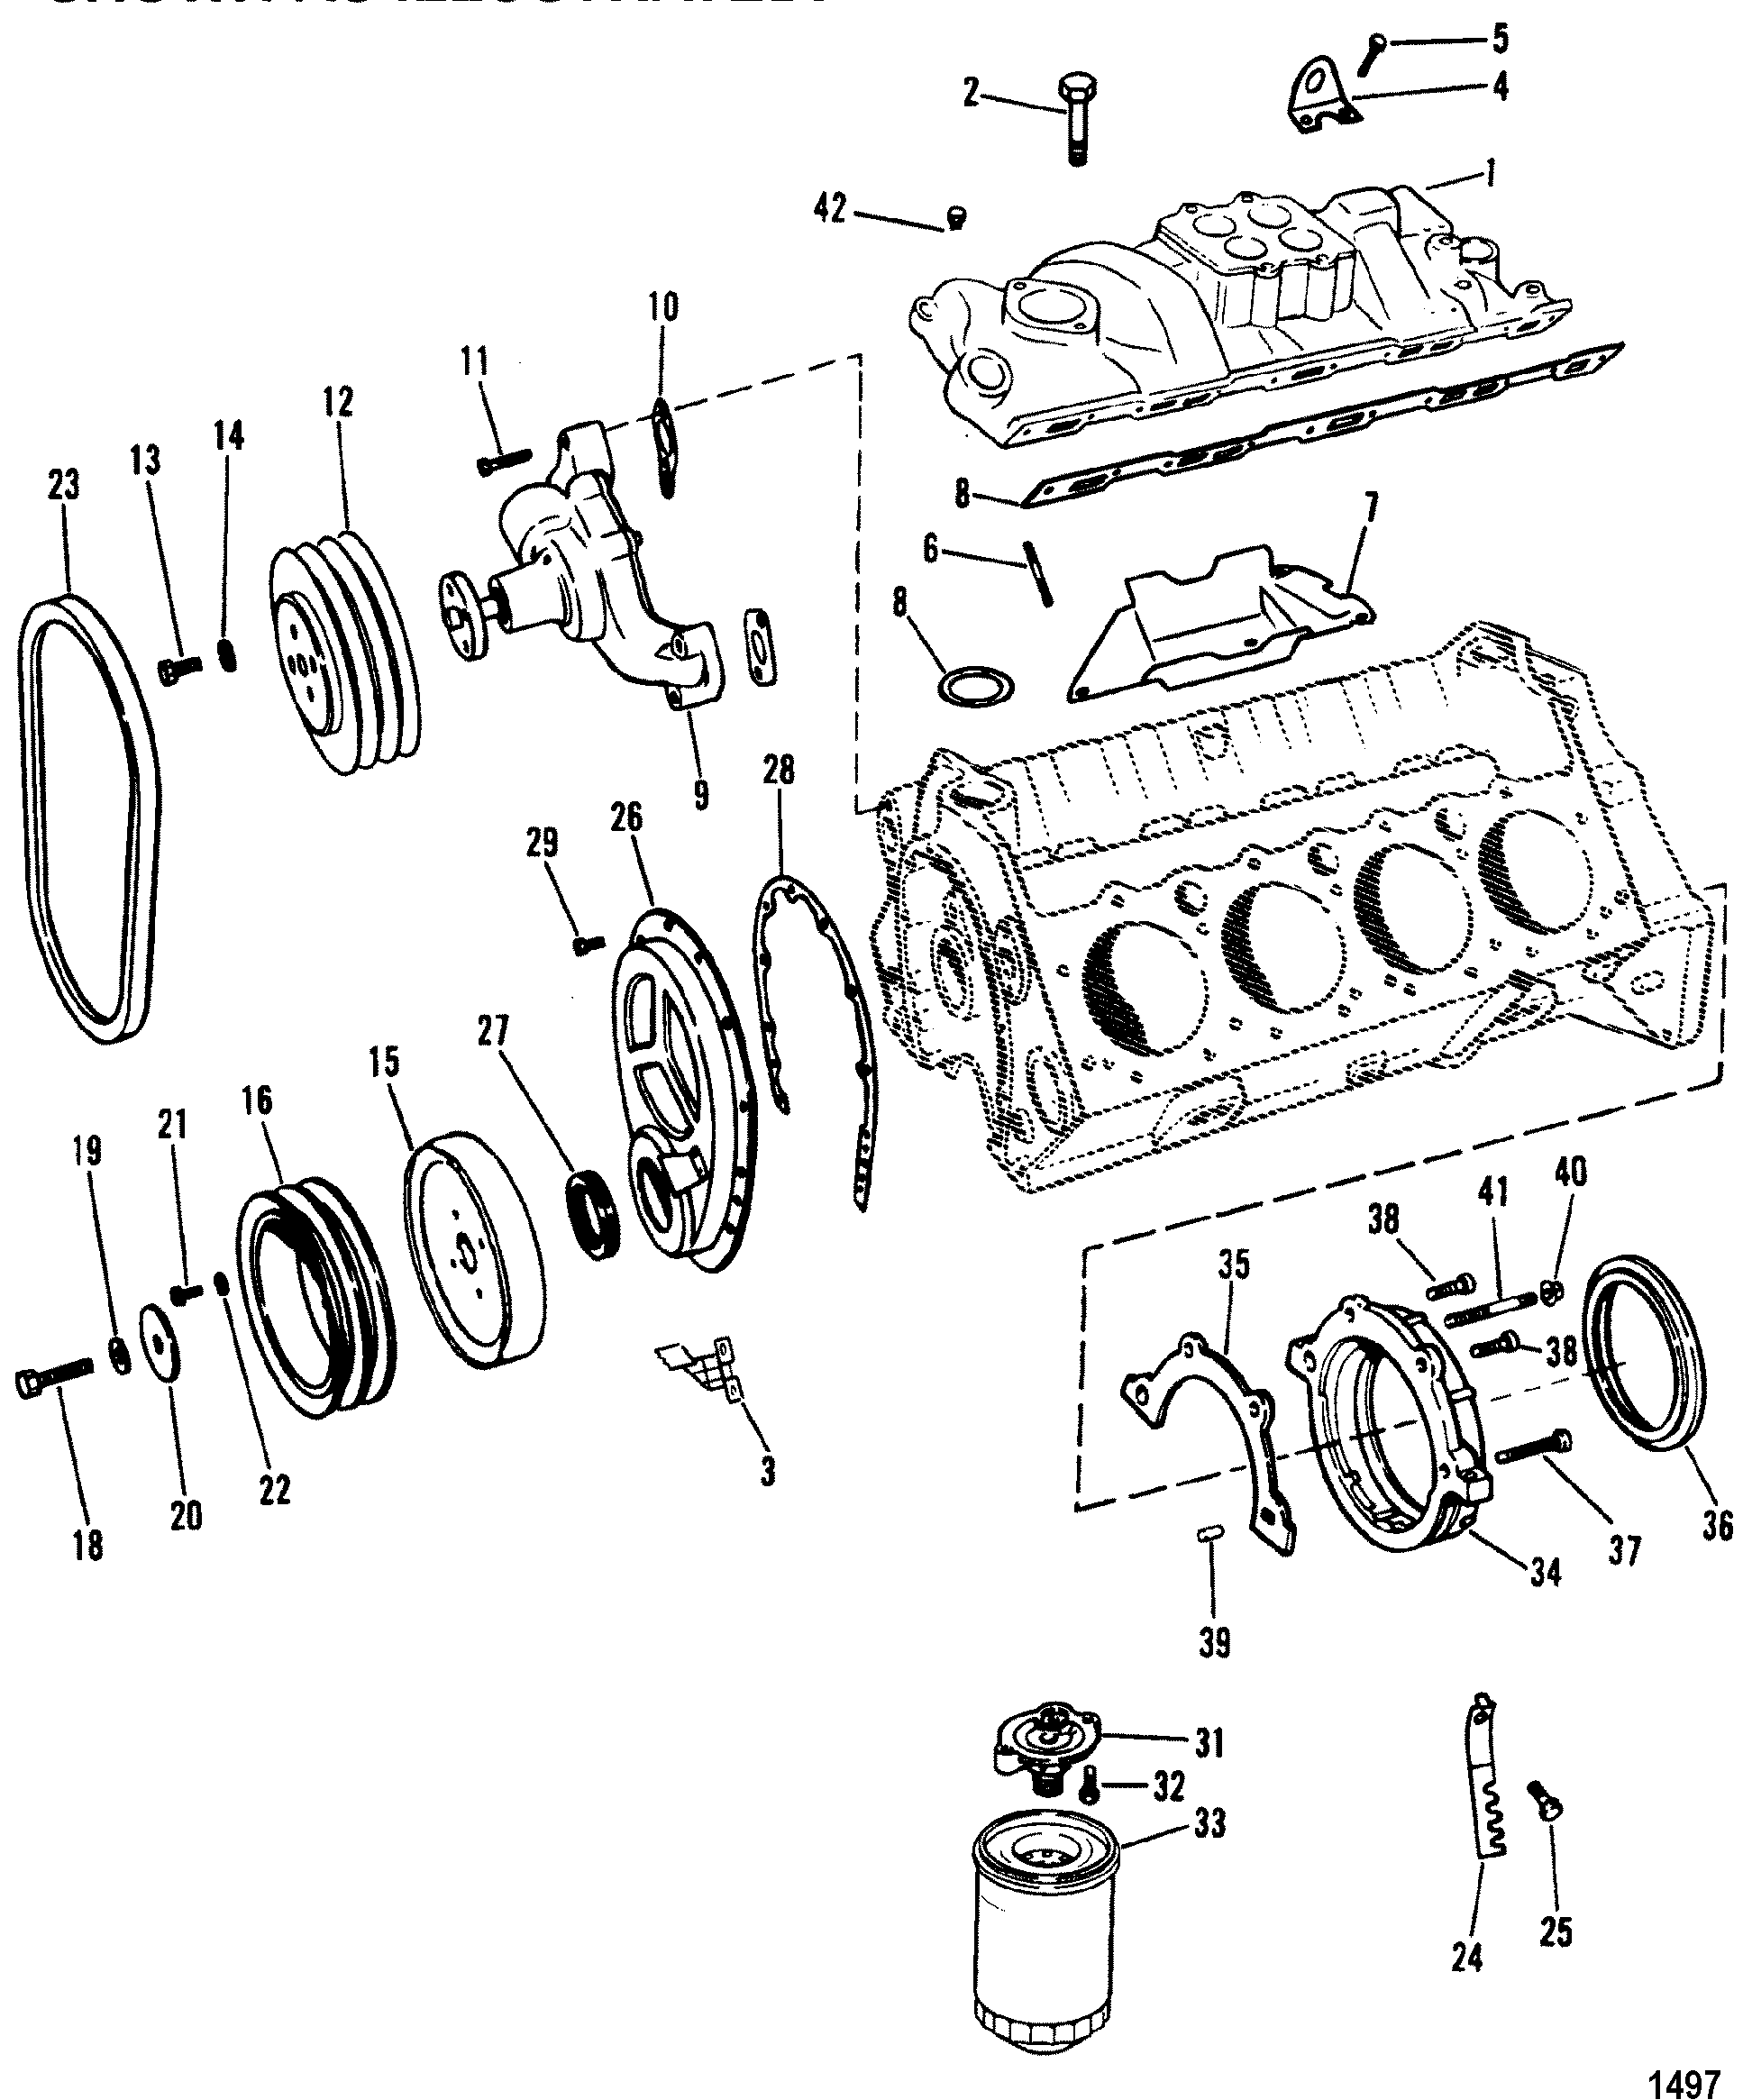 INTAKE MANIFOLD AND FRONT COVER(DESIGN I)